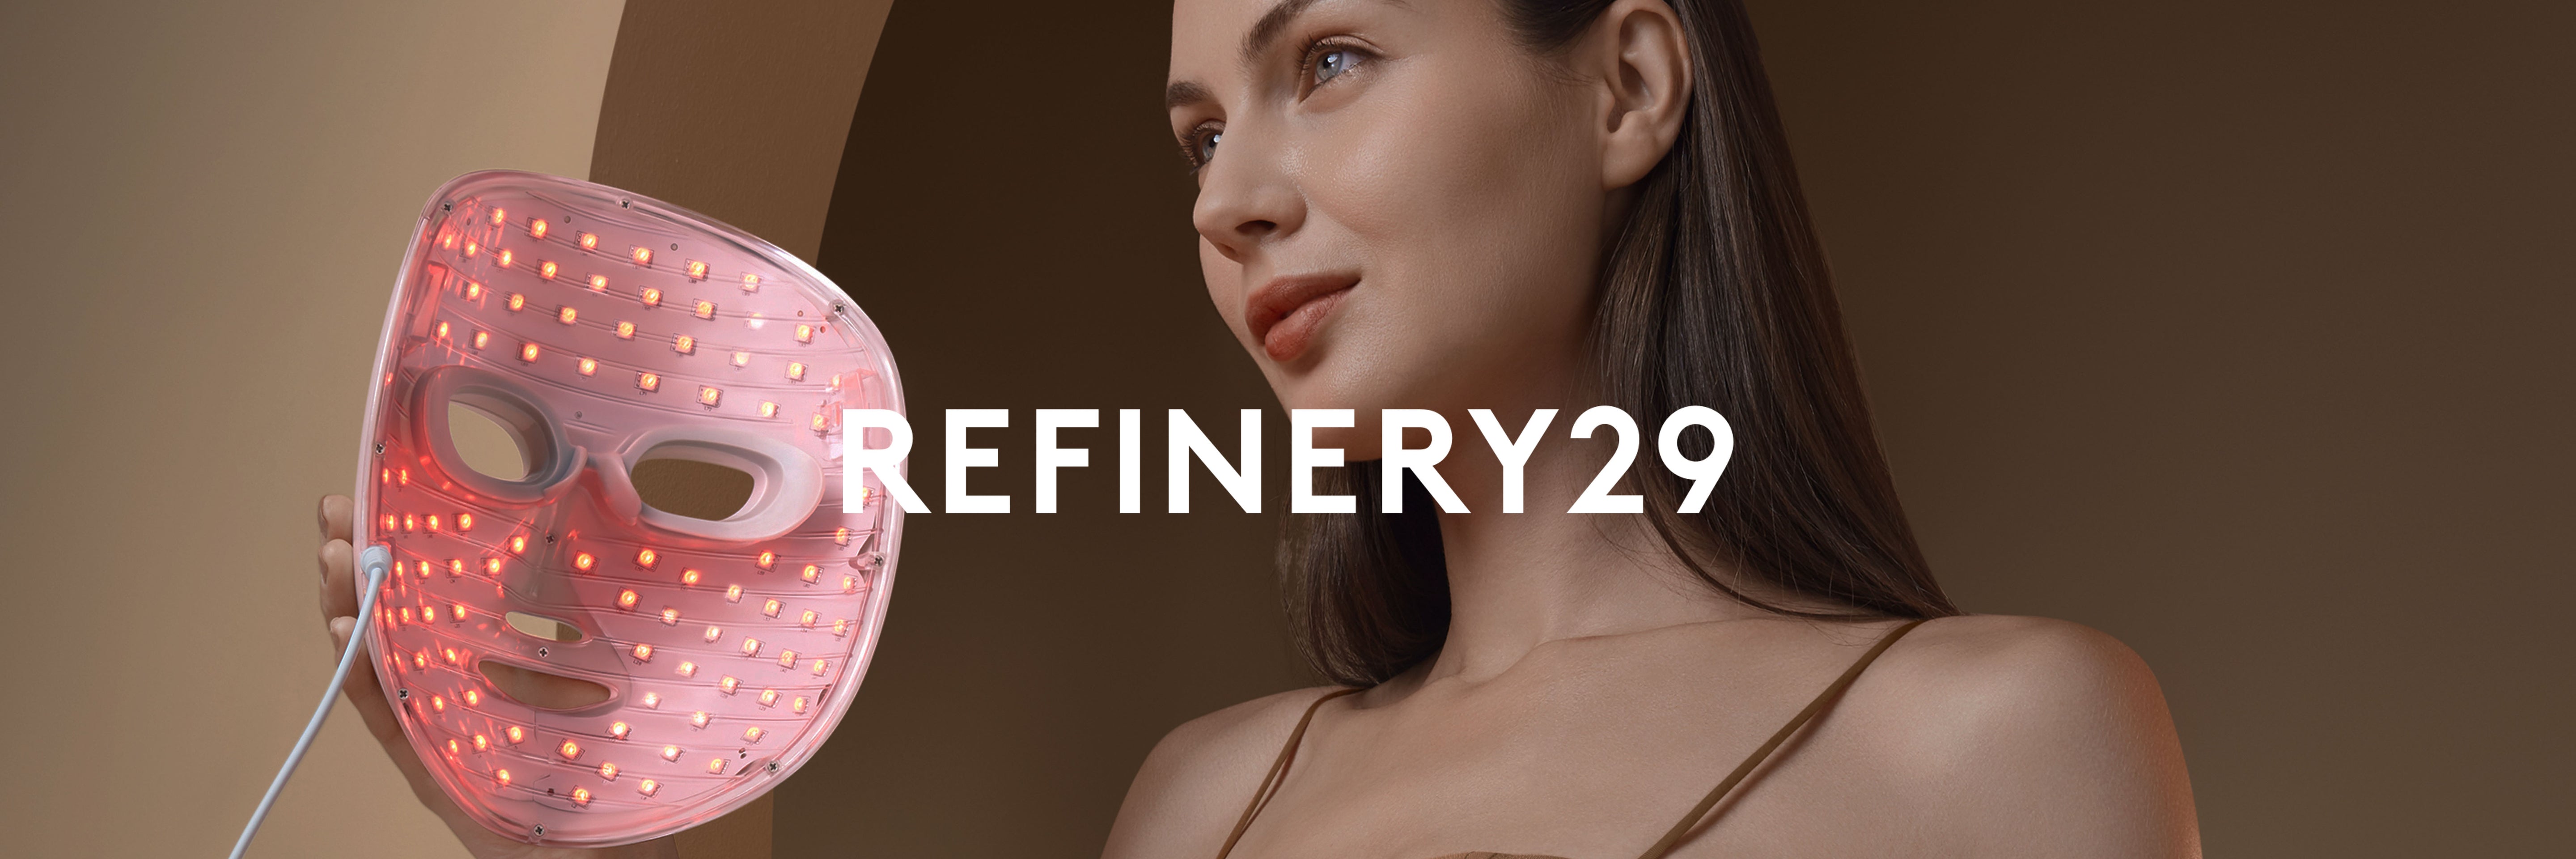 REFINERY29 RAVES ABOUT OUR LIGHTAURA PLUS